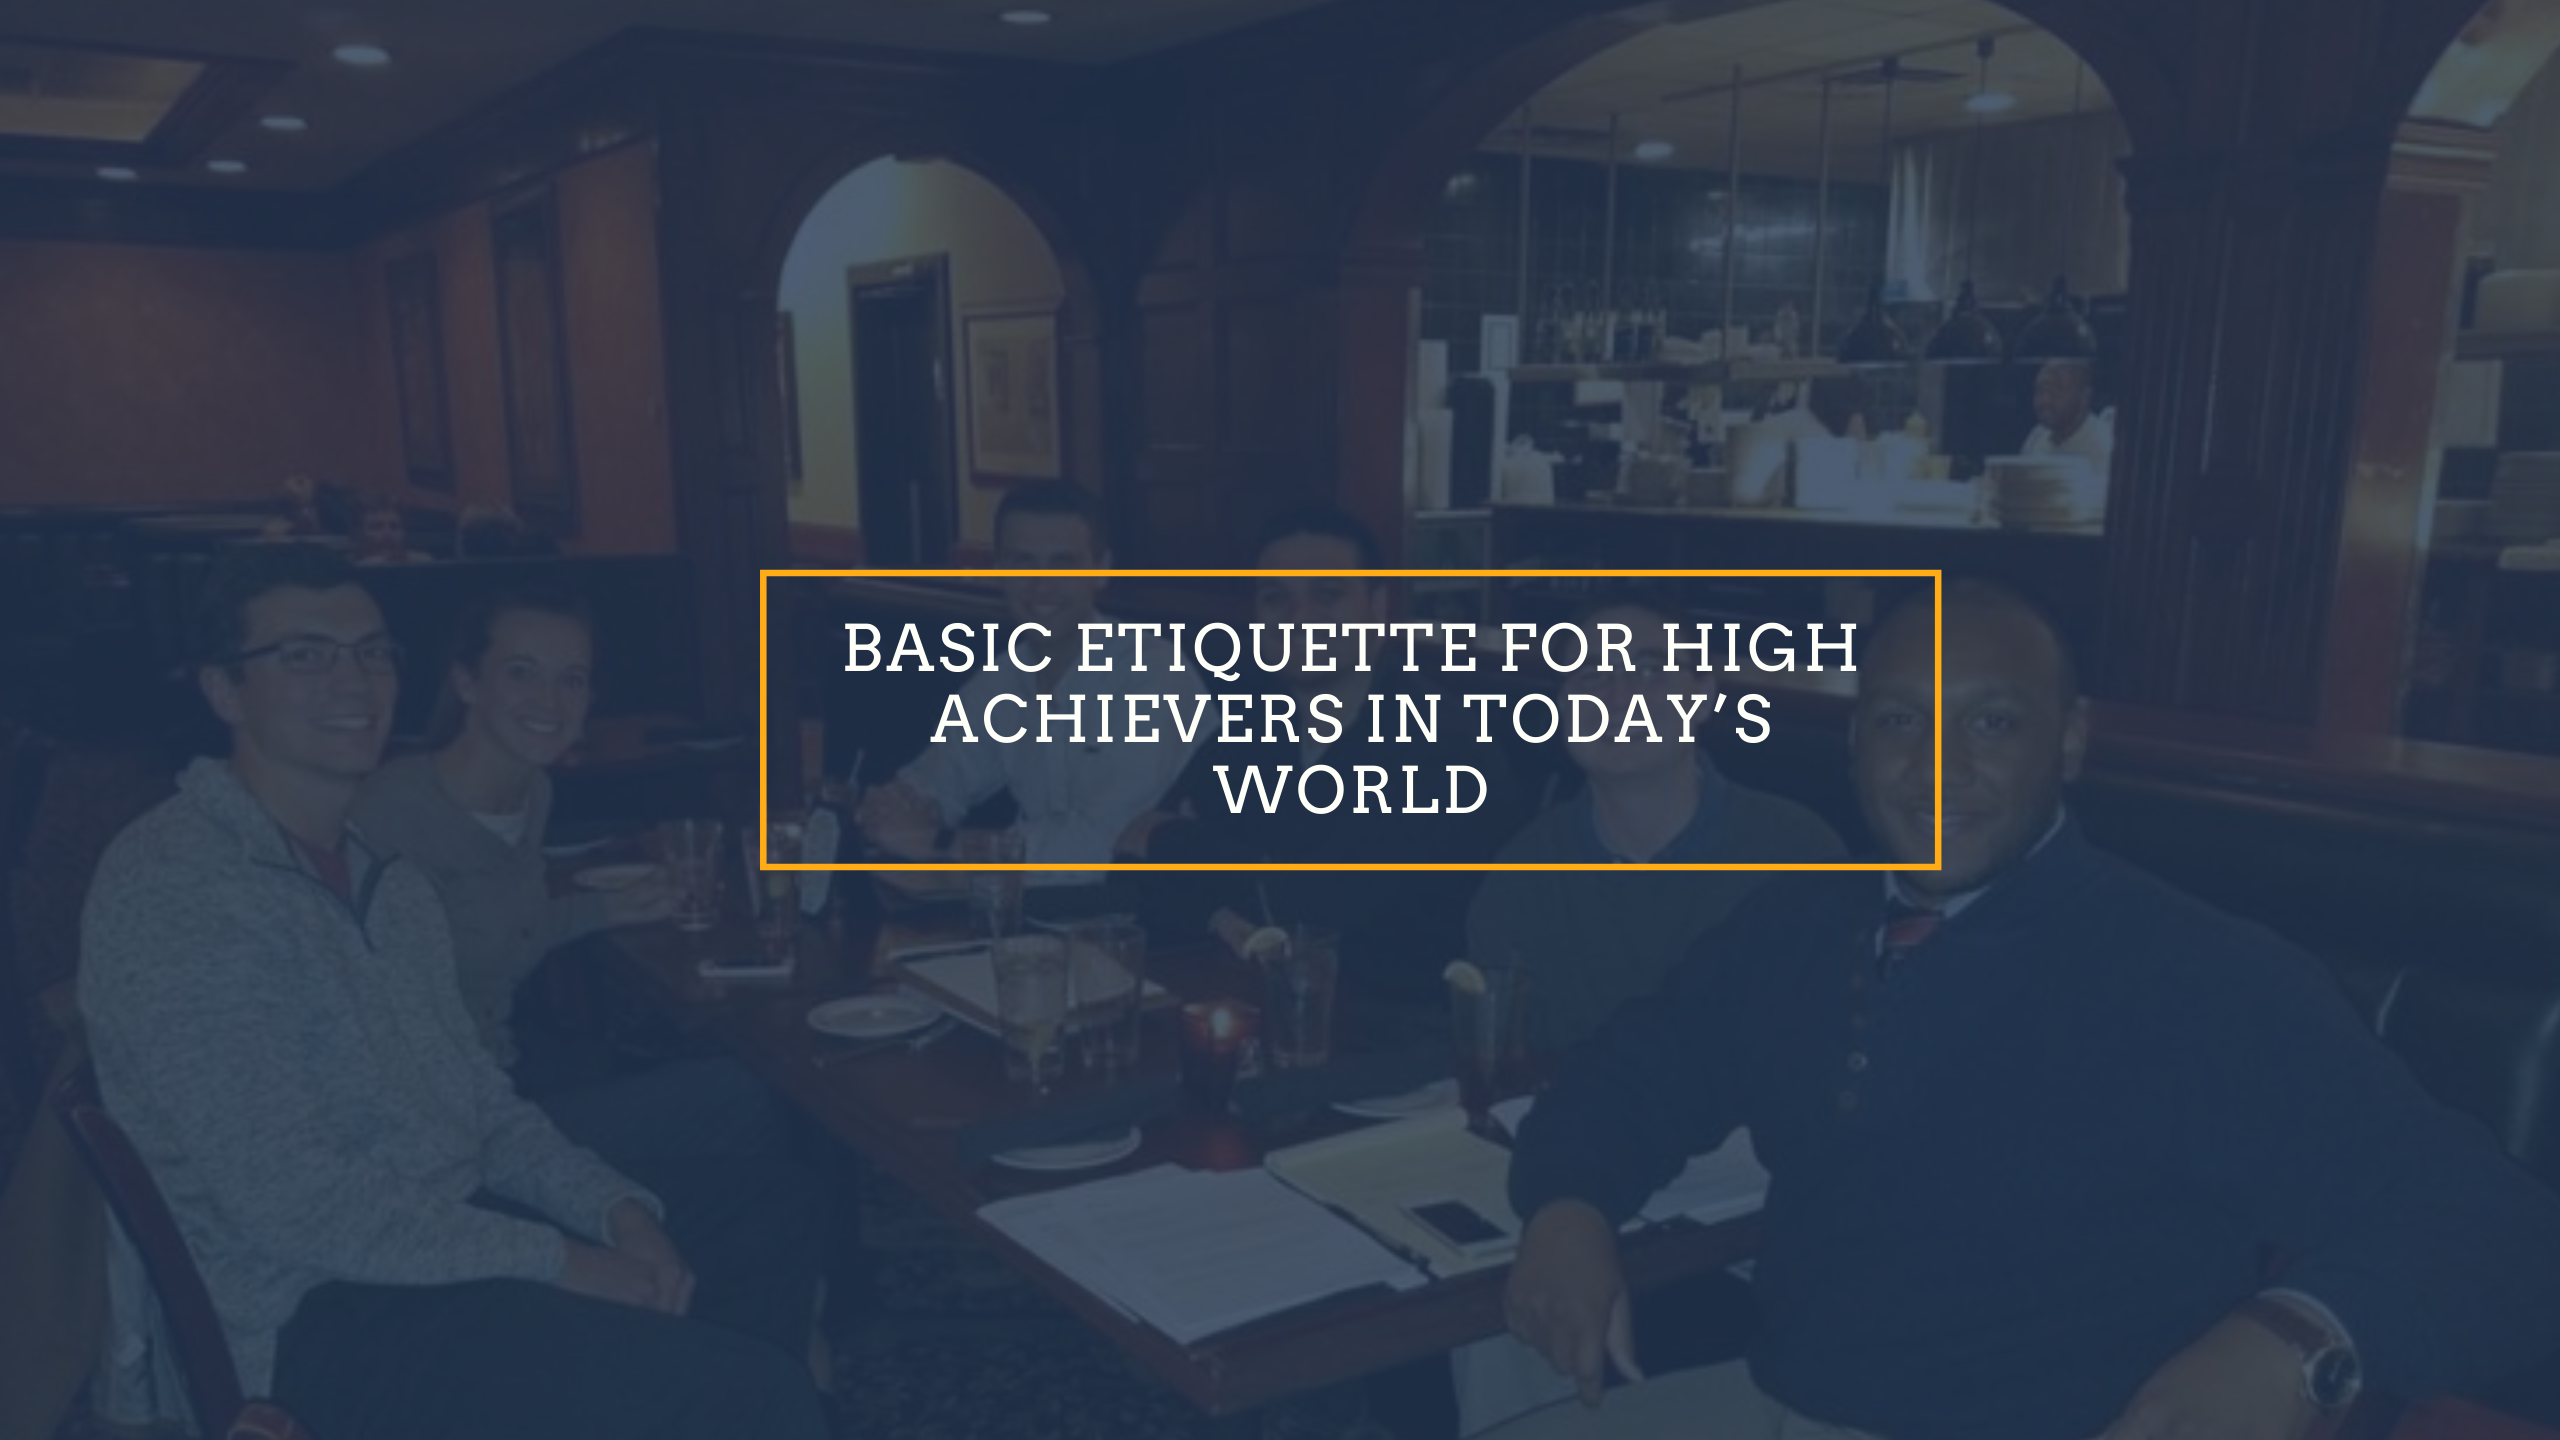 Basic Etiquette for High Achievers in Today’s World